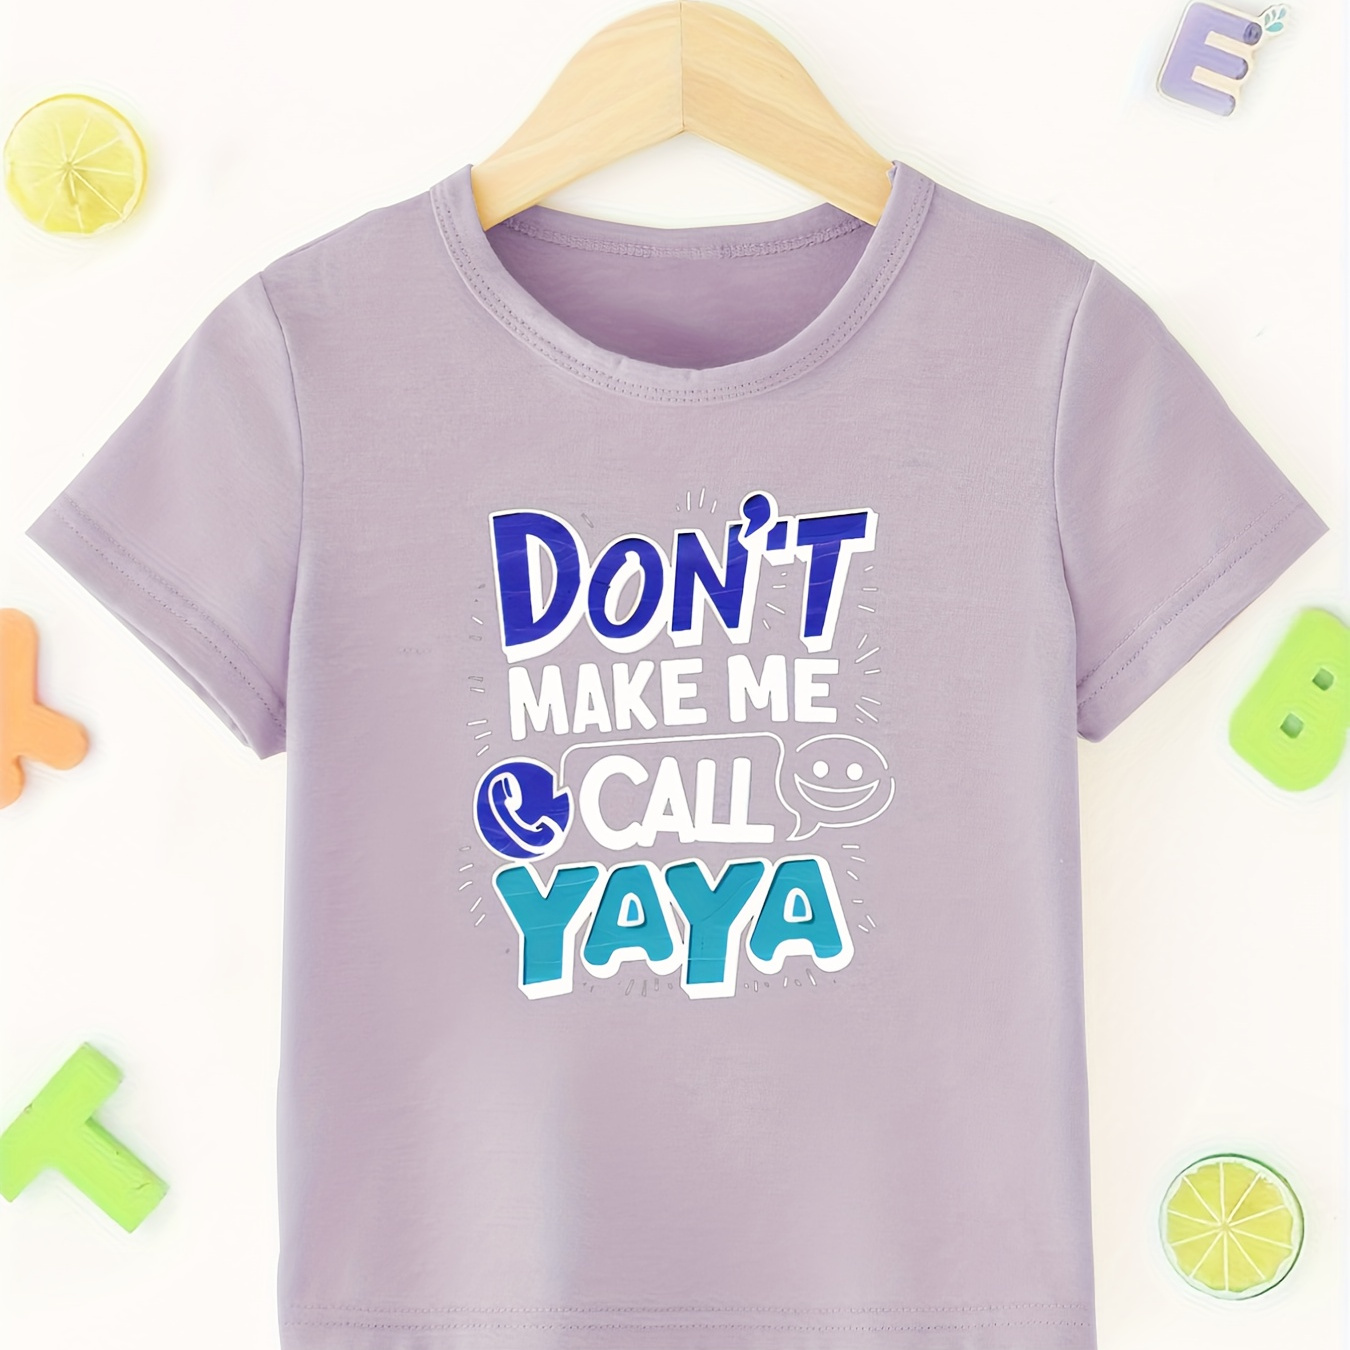 

Don't Make Me Call Yaya Print Casual Short Sleeve T-shirts For Boys - Cool, Lightweight And Comfy Summer Clothes